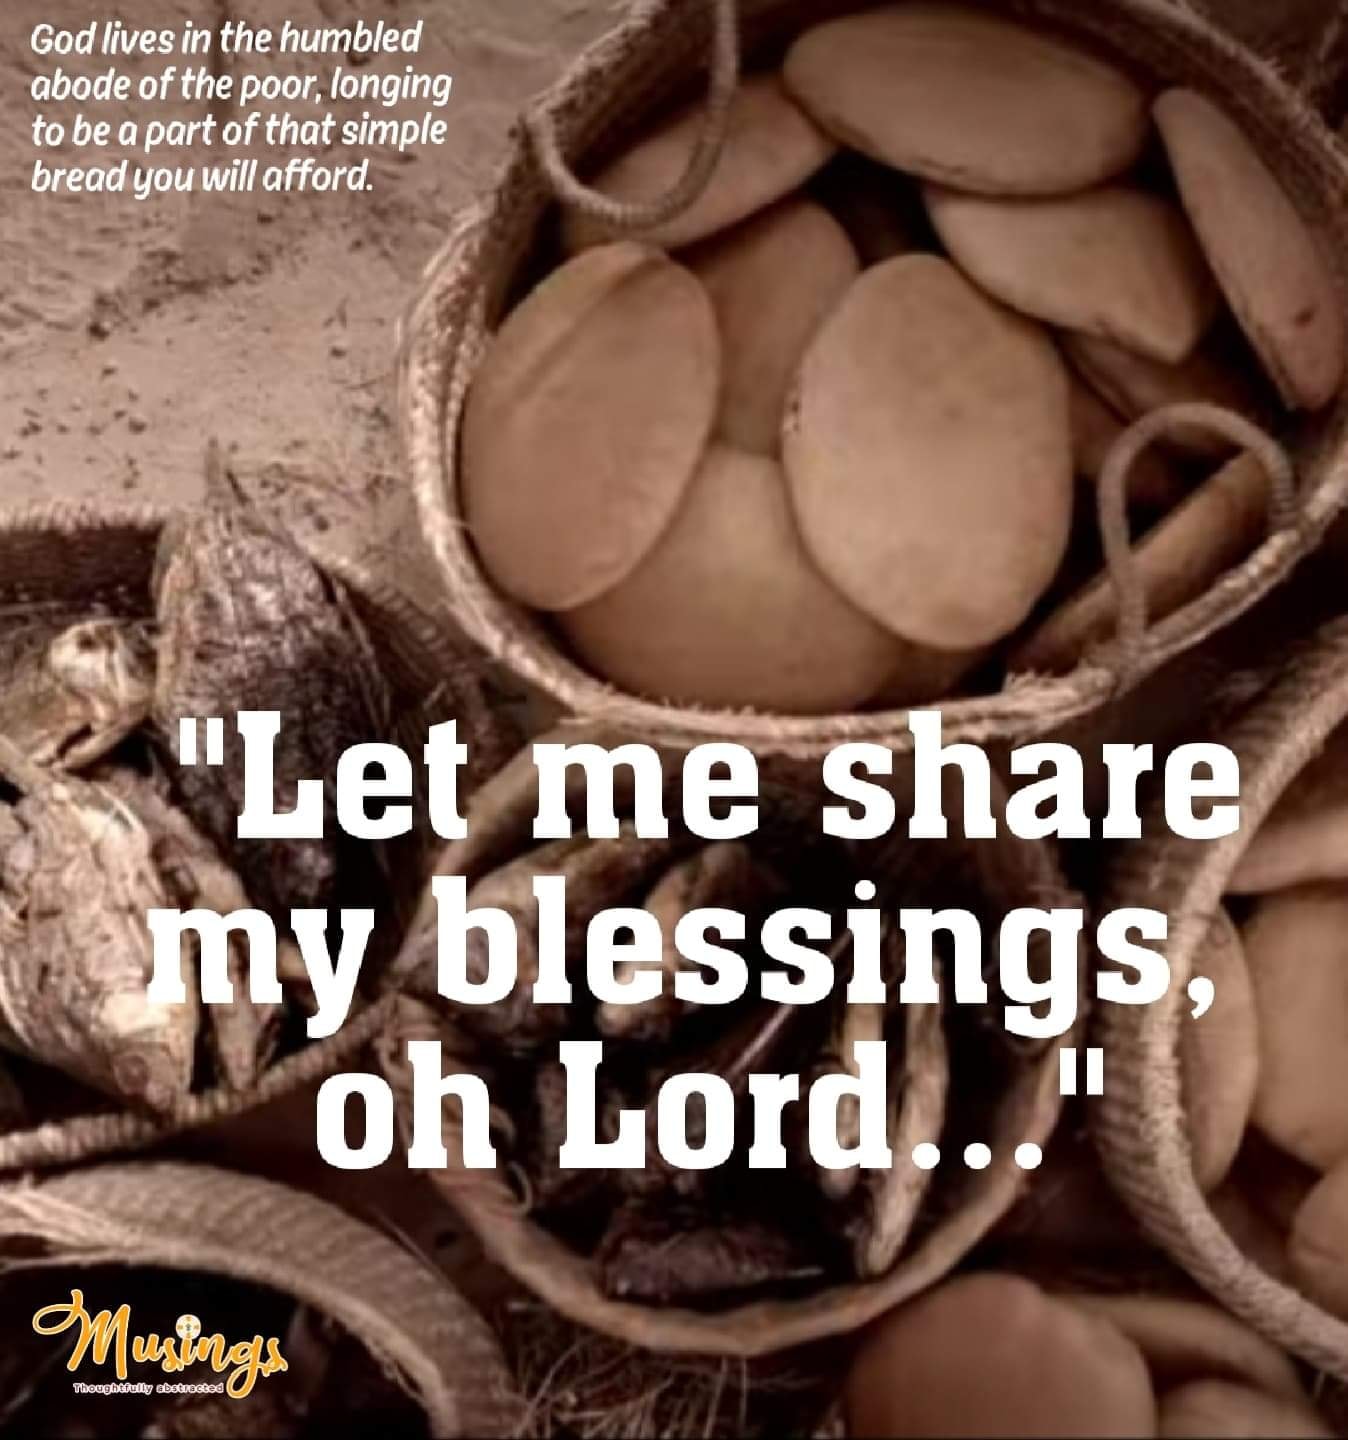 "Let me share your blessing, oh Lord..."